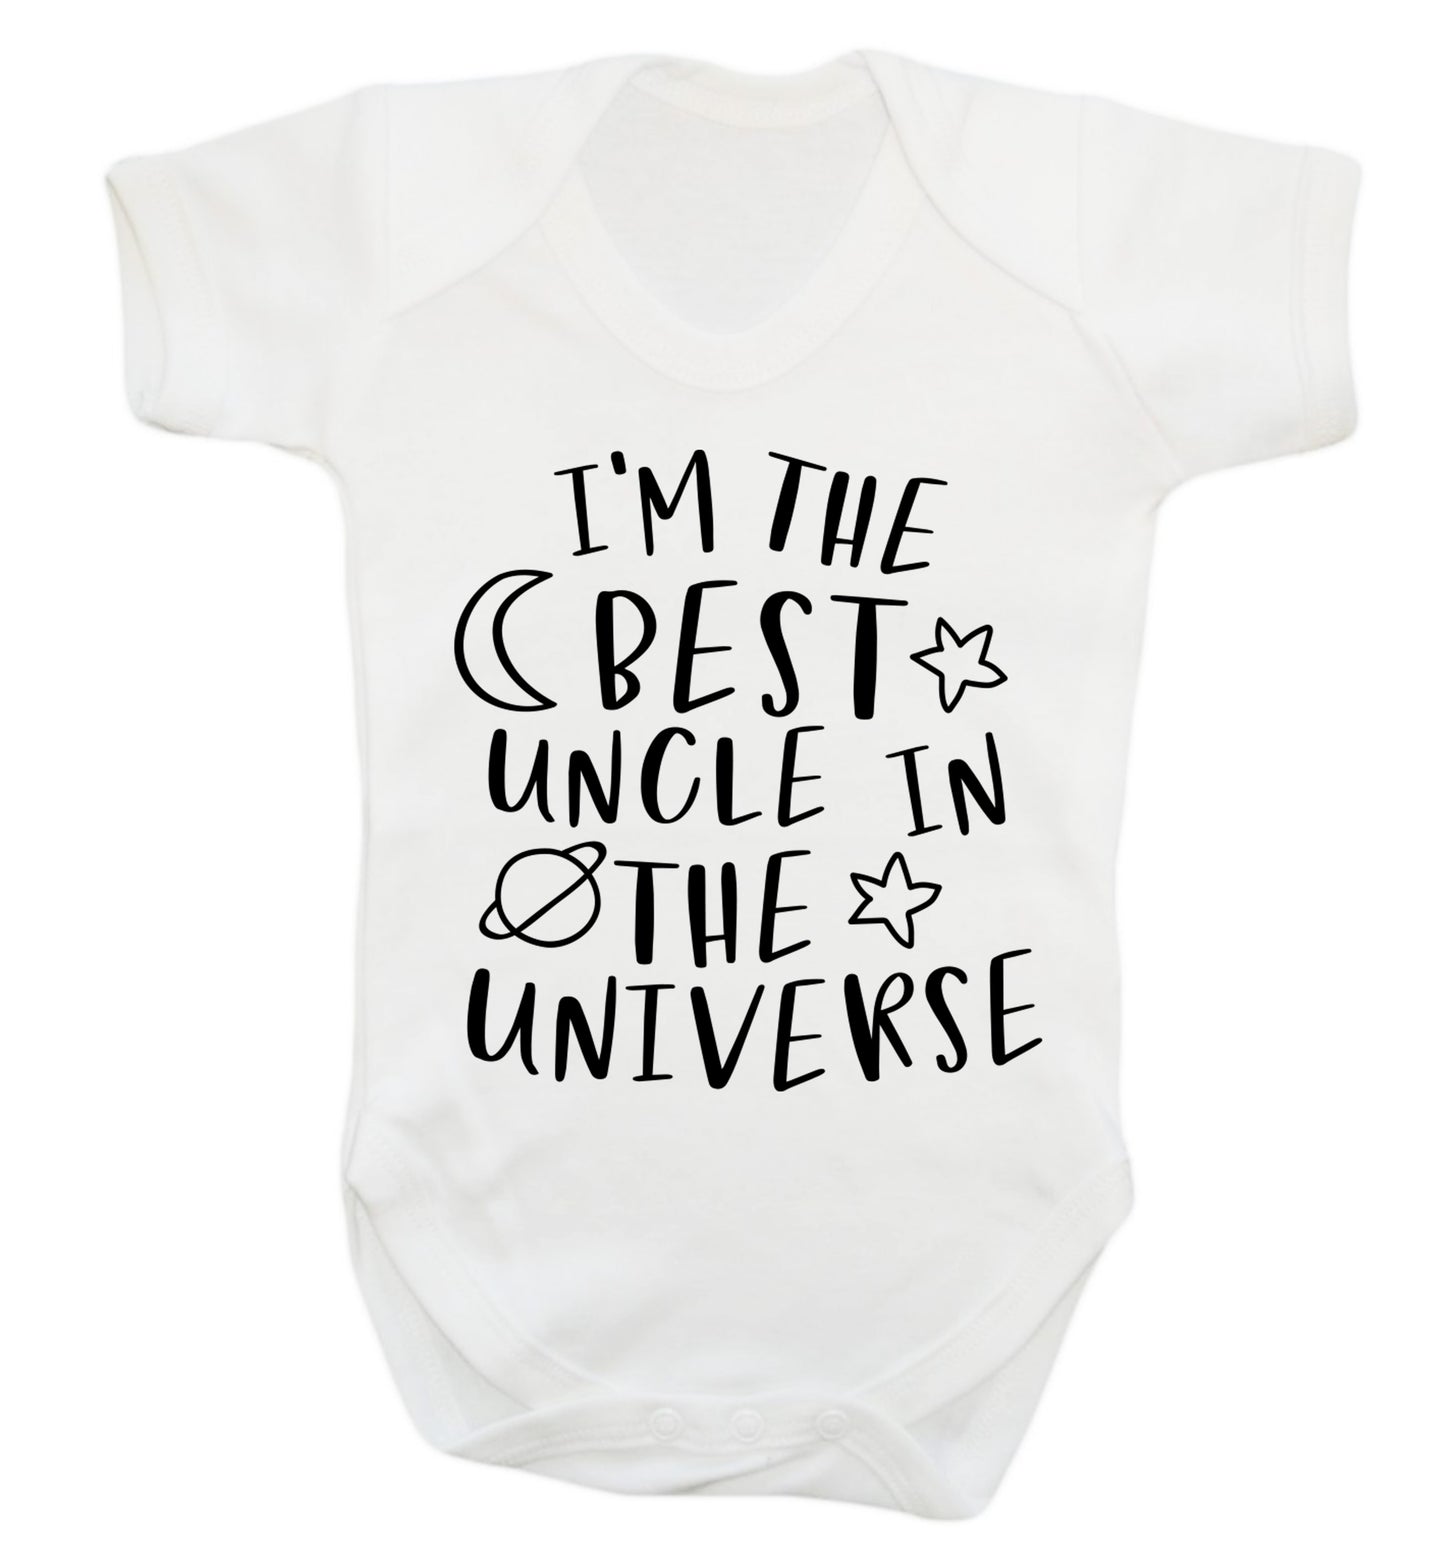 I'm the best uncle in the universe Baby Vest white 18-24 months